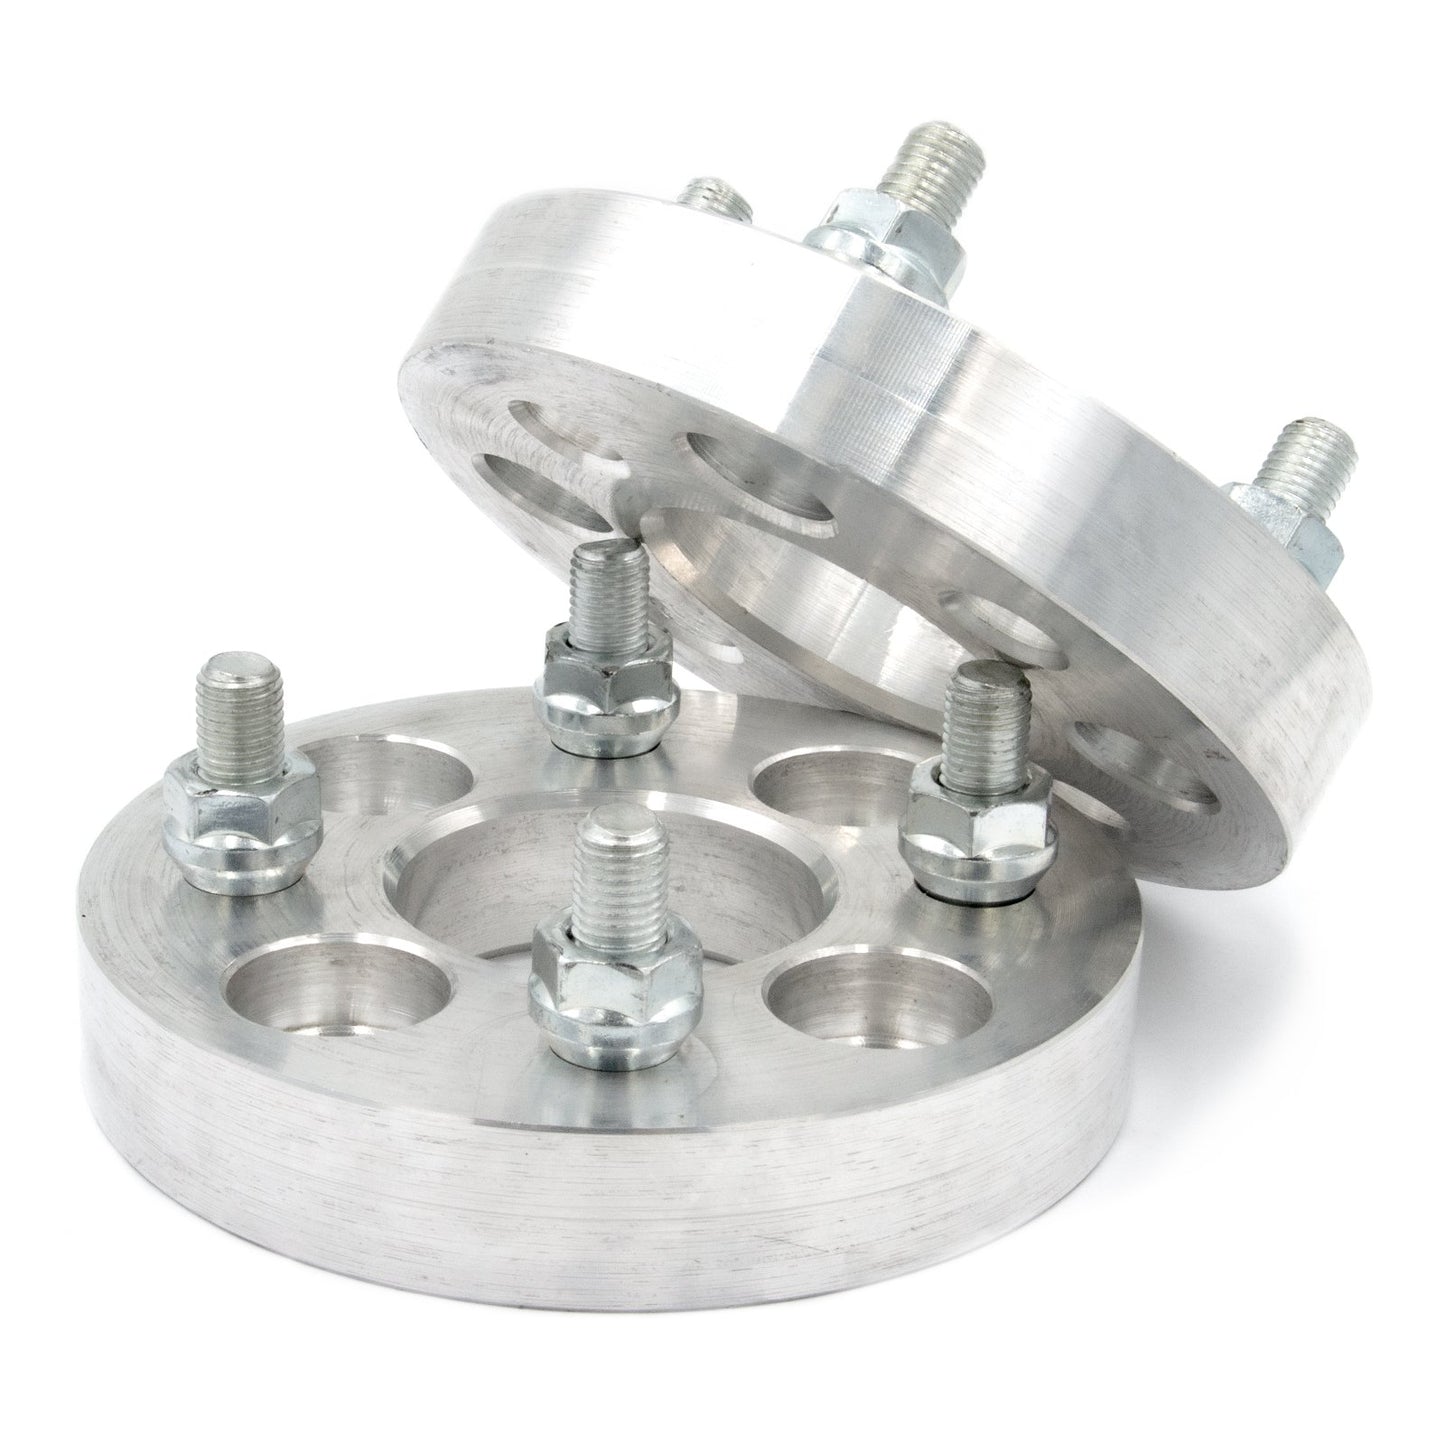 4x100 to 4x4" Wheel Spacer/Adapter - Thickness: 3/4"- 4"